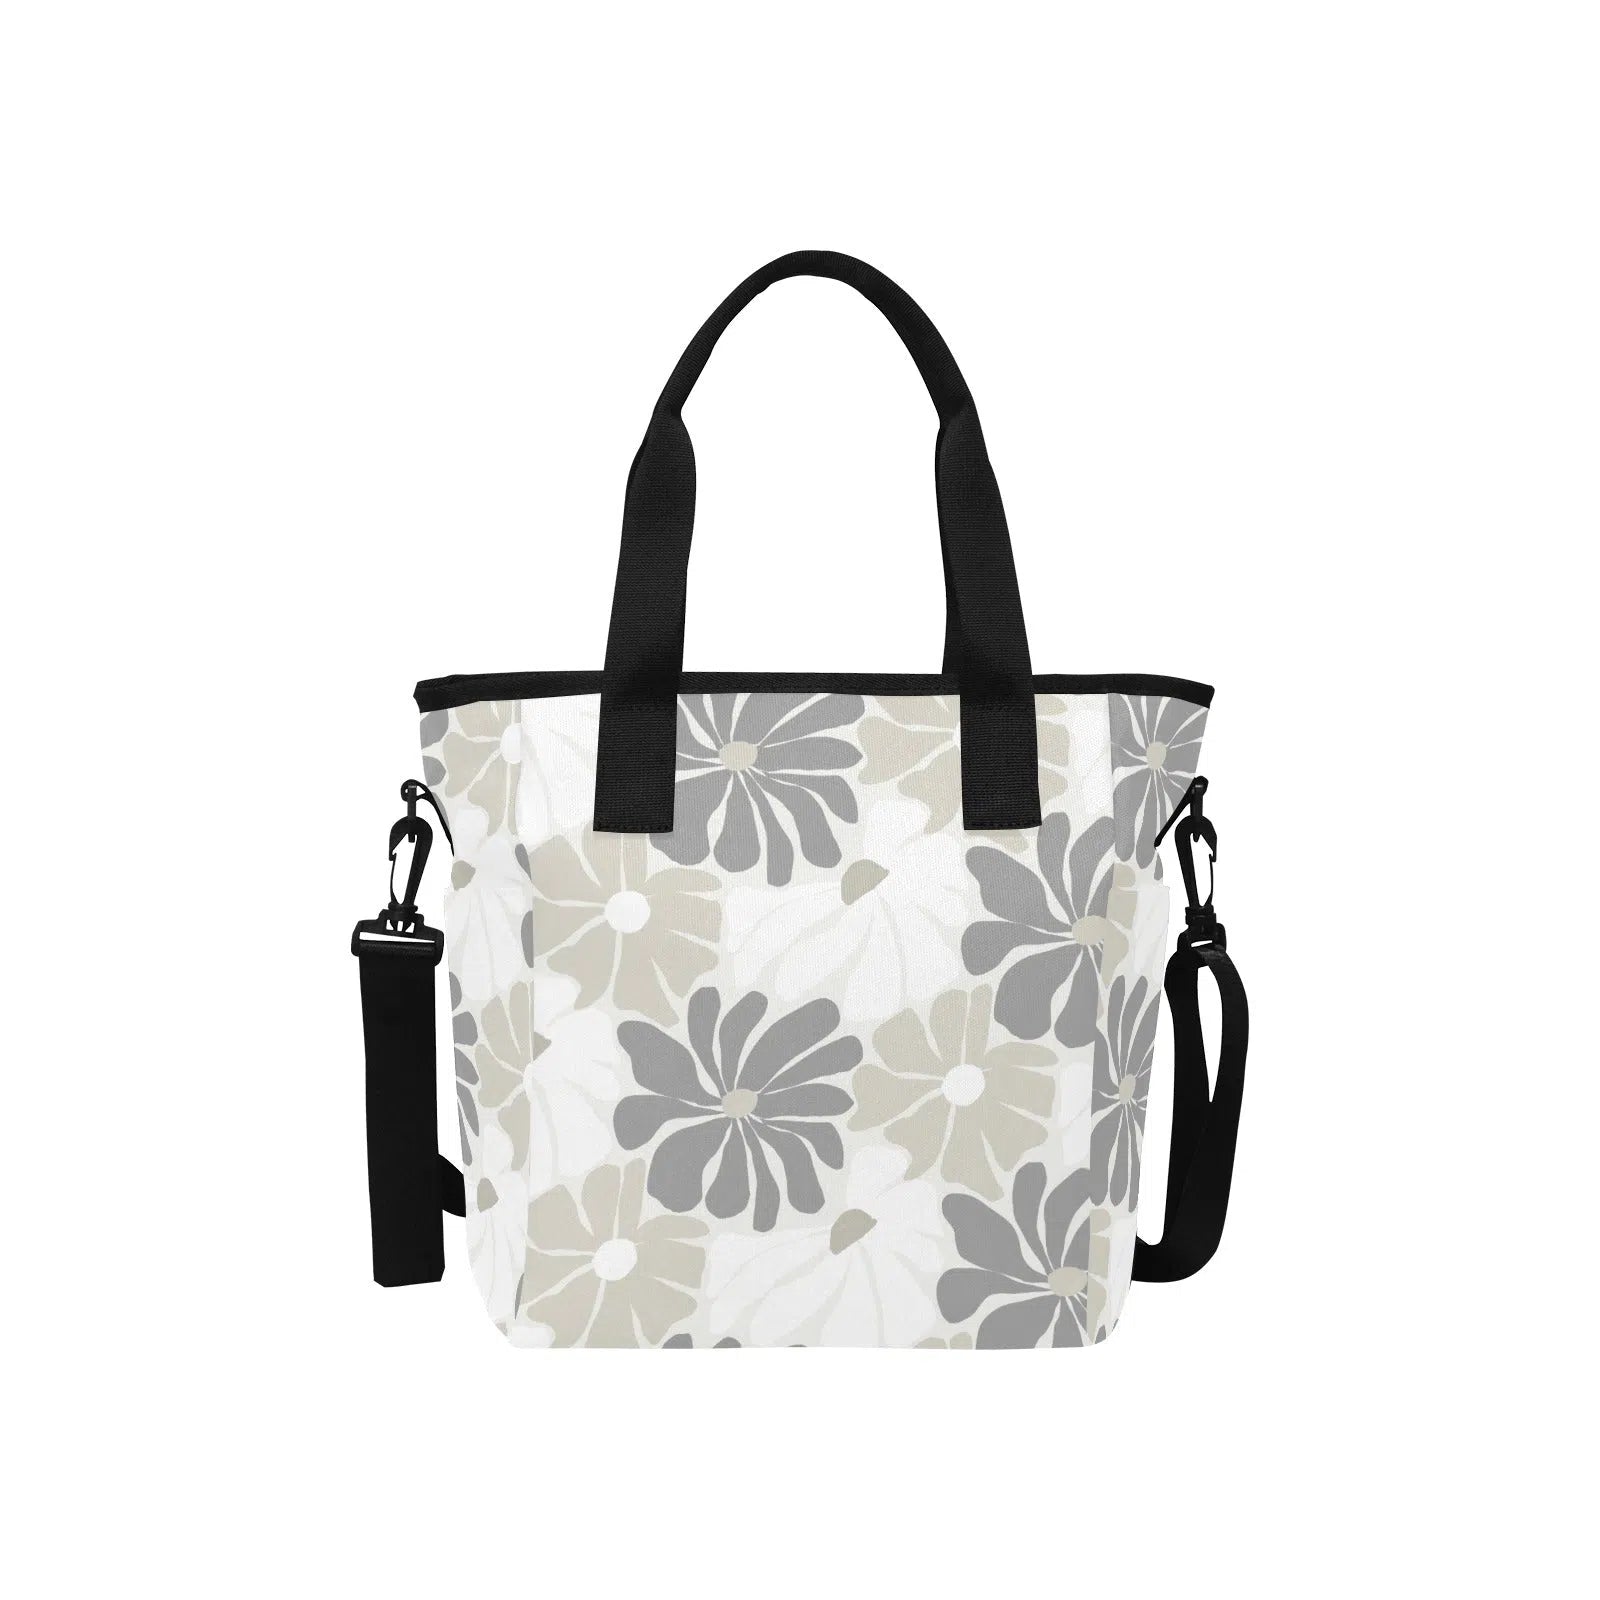 Large Lunch Tote, Daisy